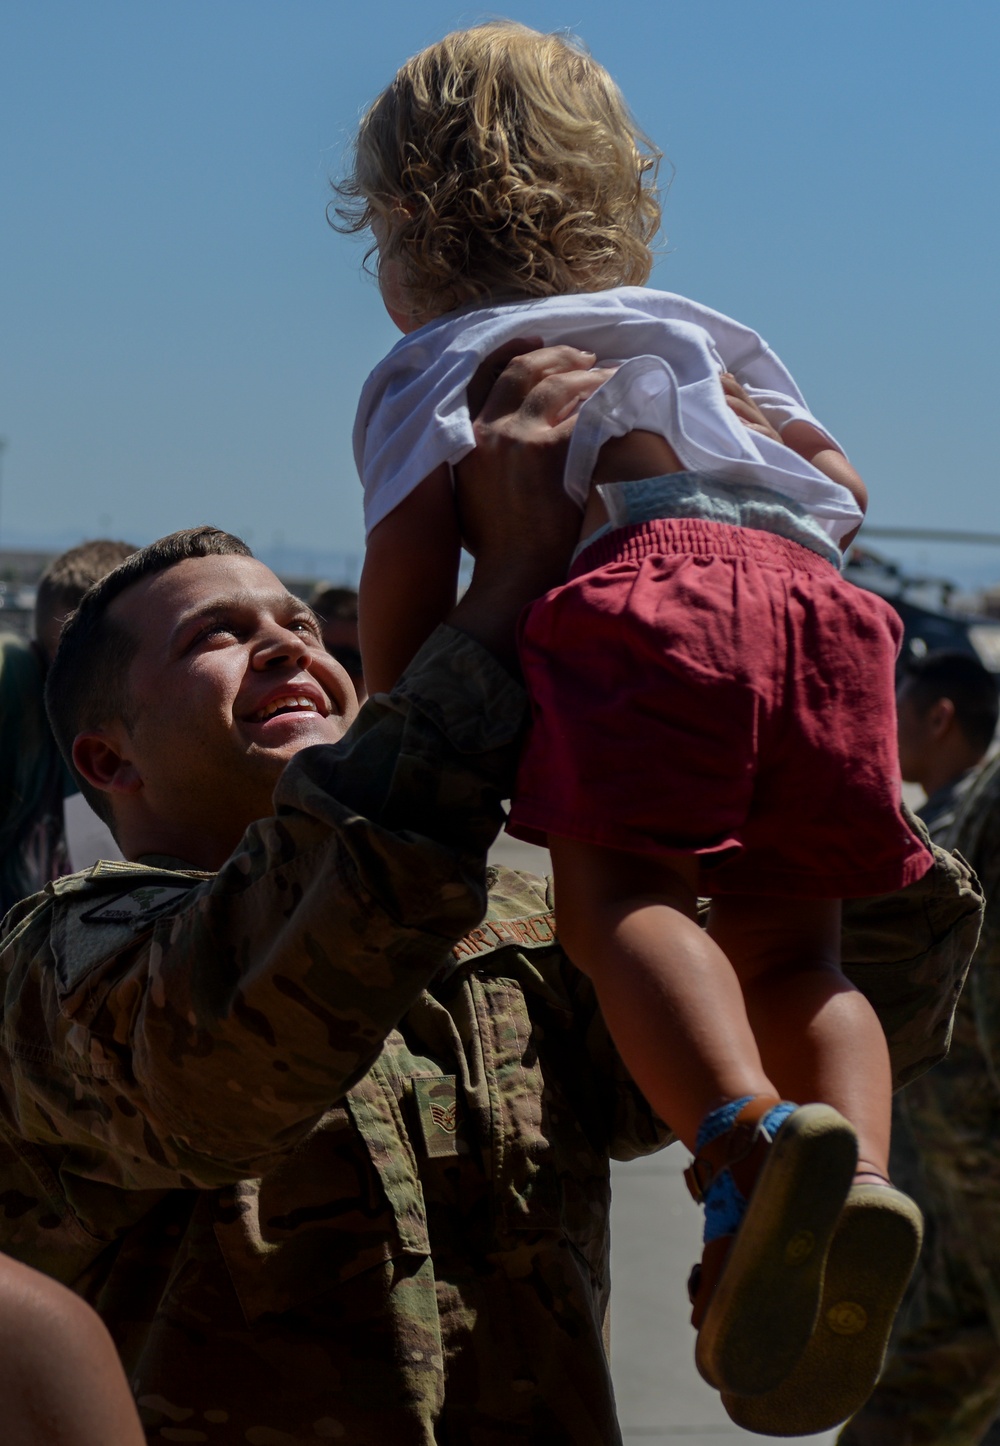 823rd MXS, 66th return from deployment